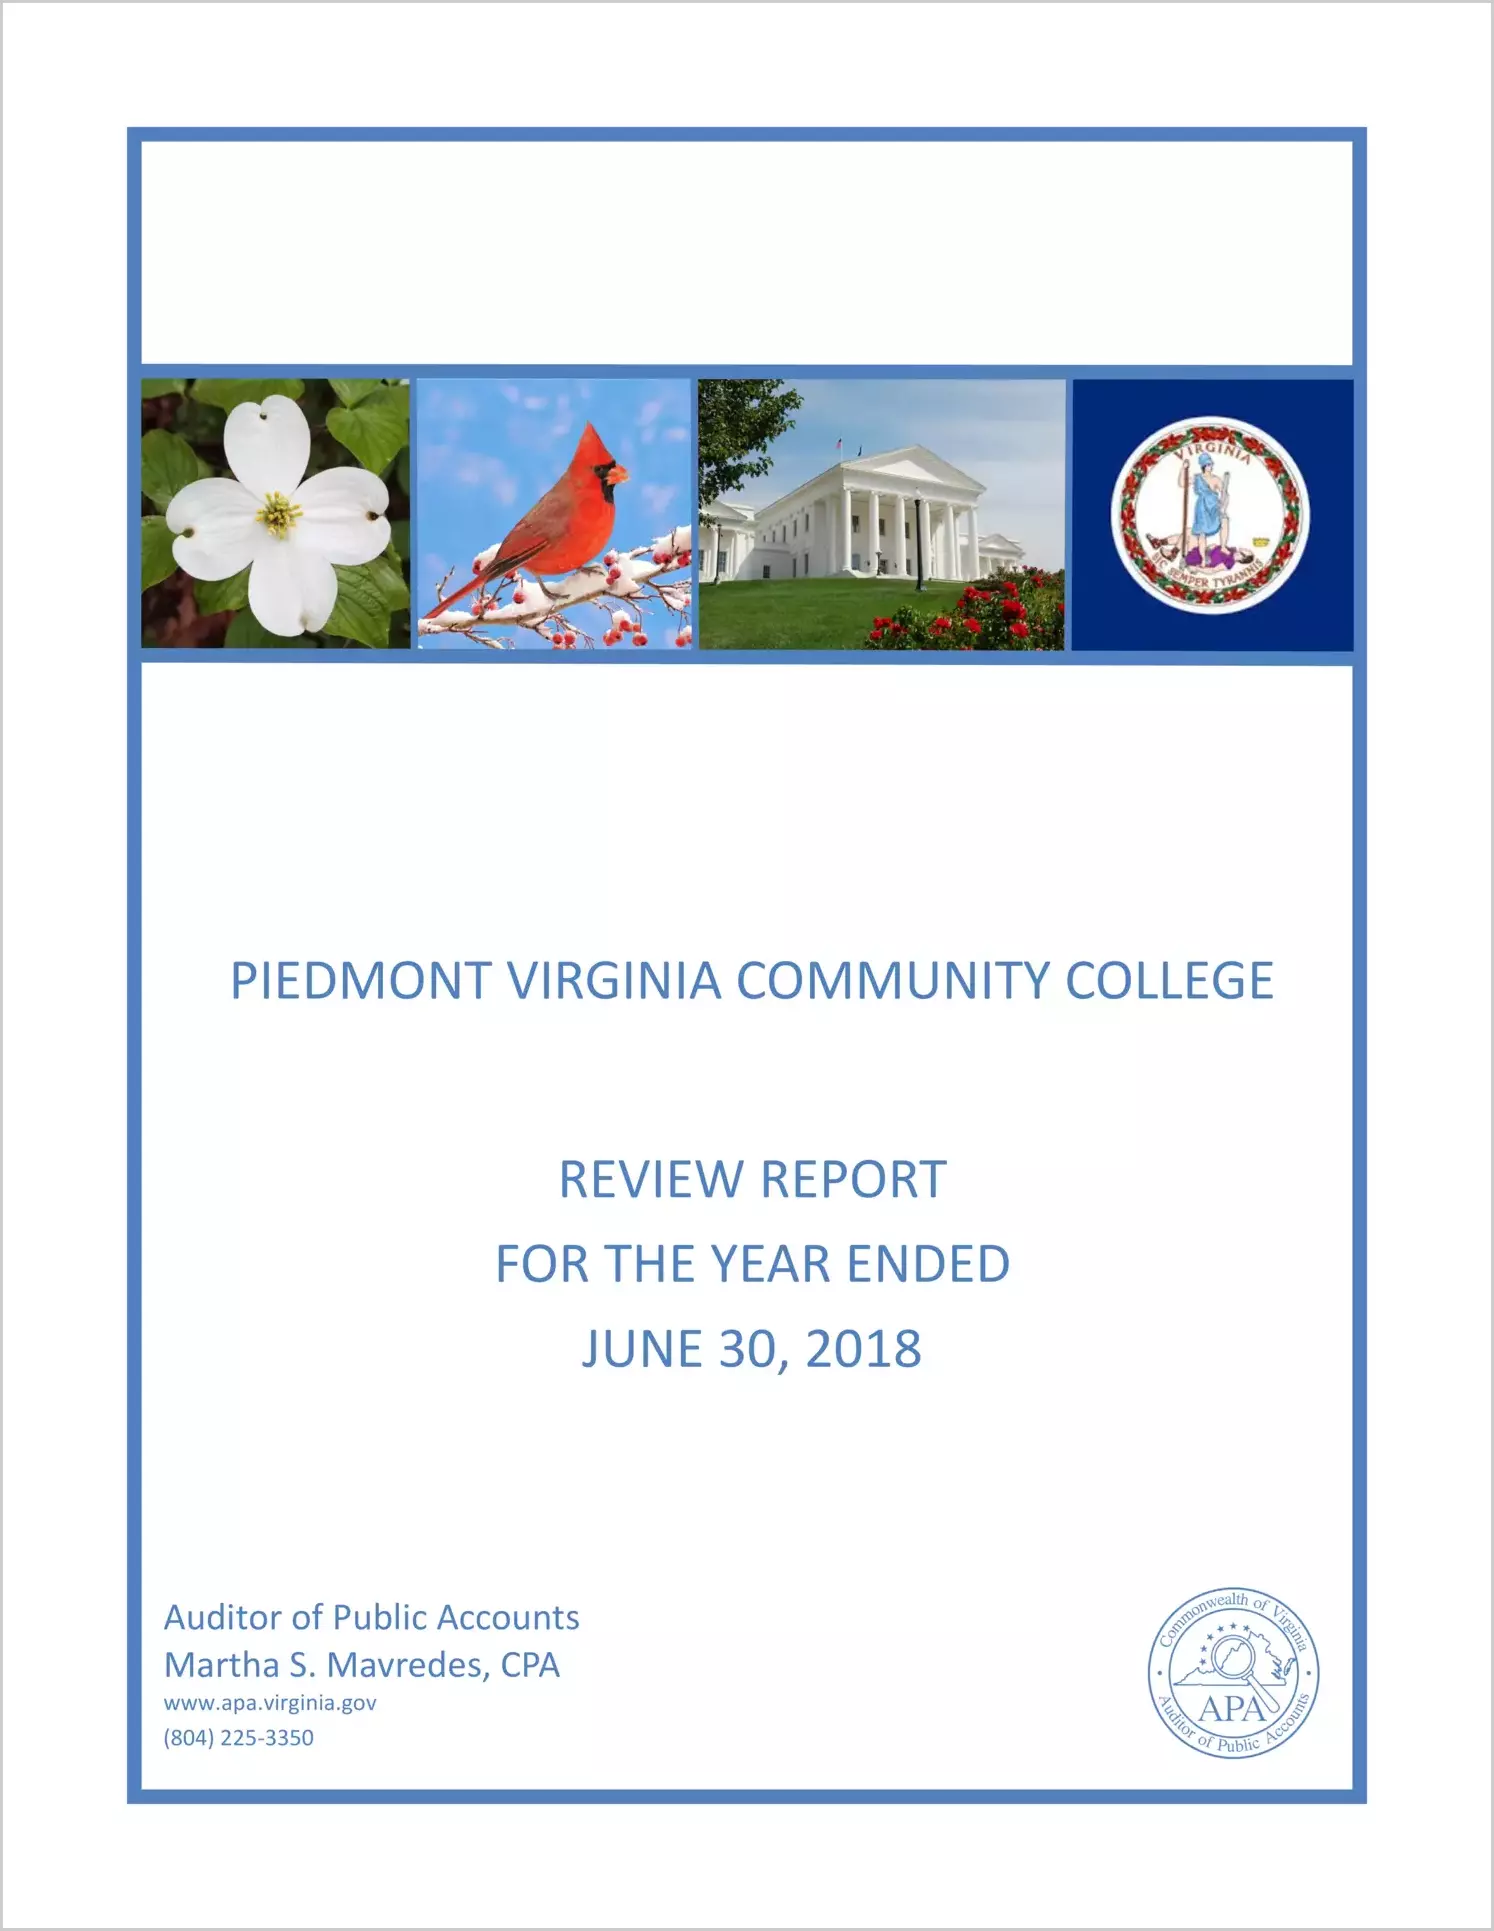 Piedmont Virginia Community College Review for the year ended June 30, 2018